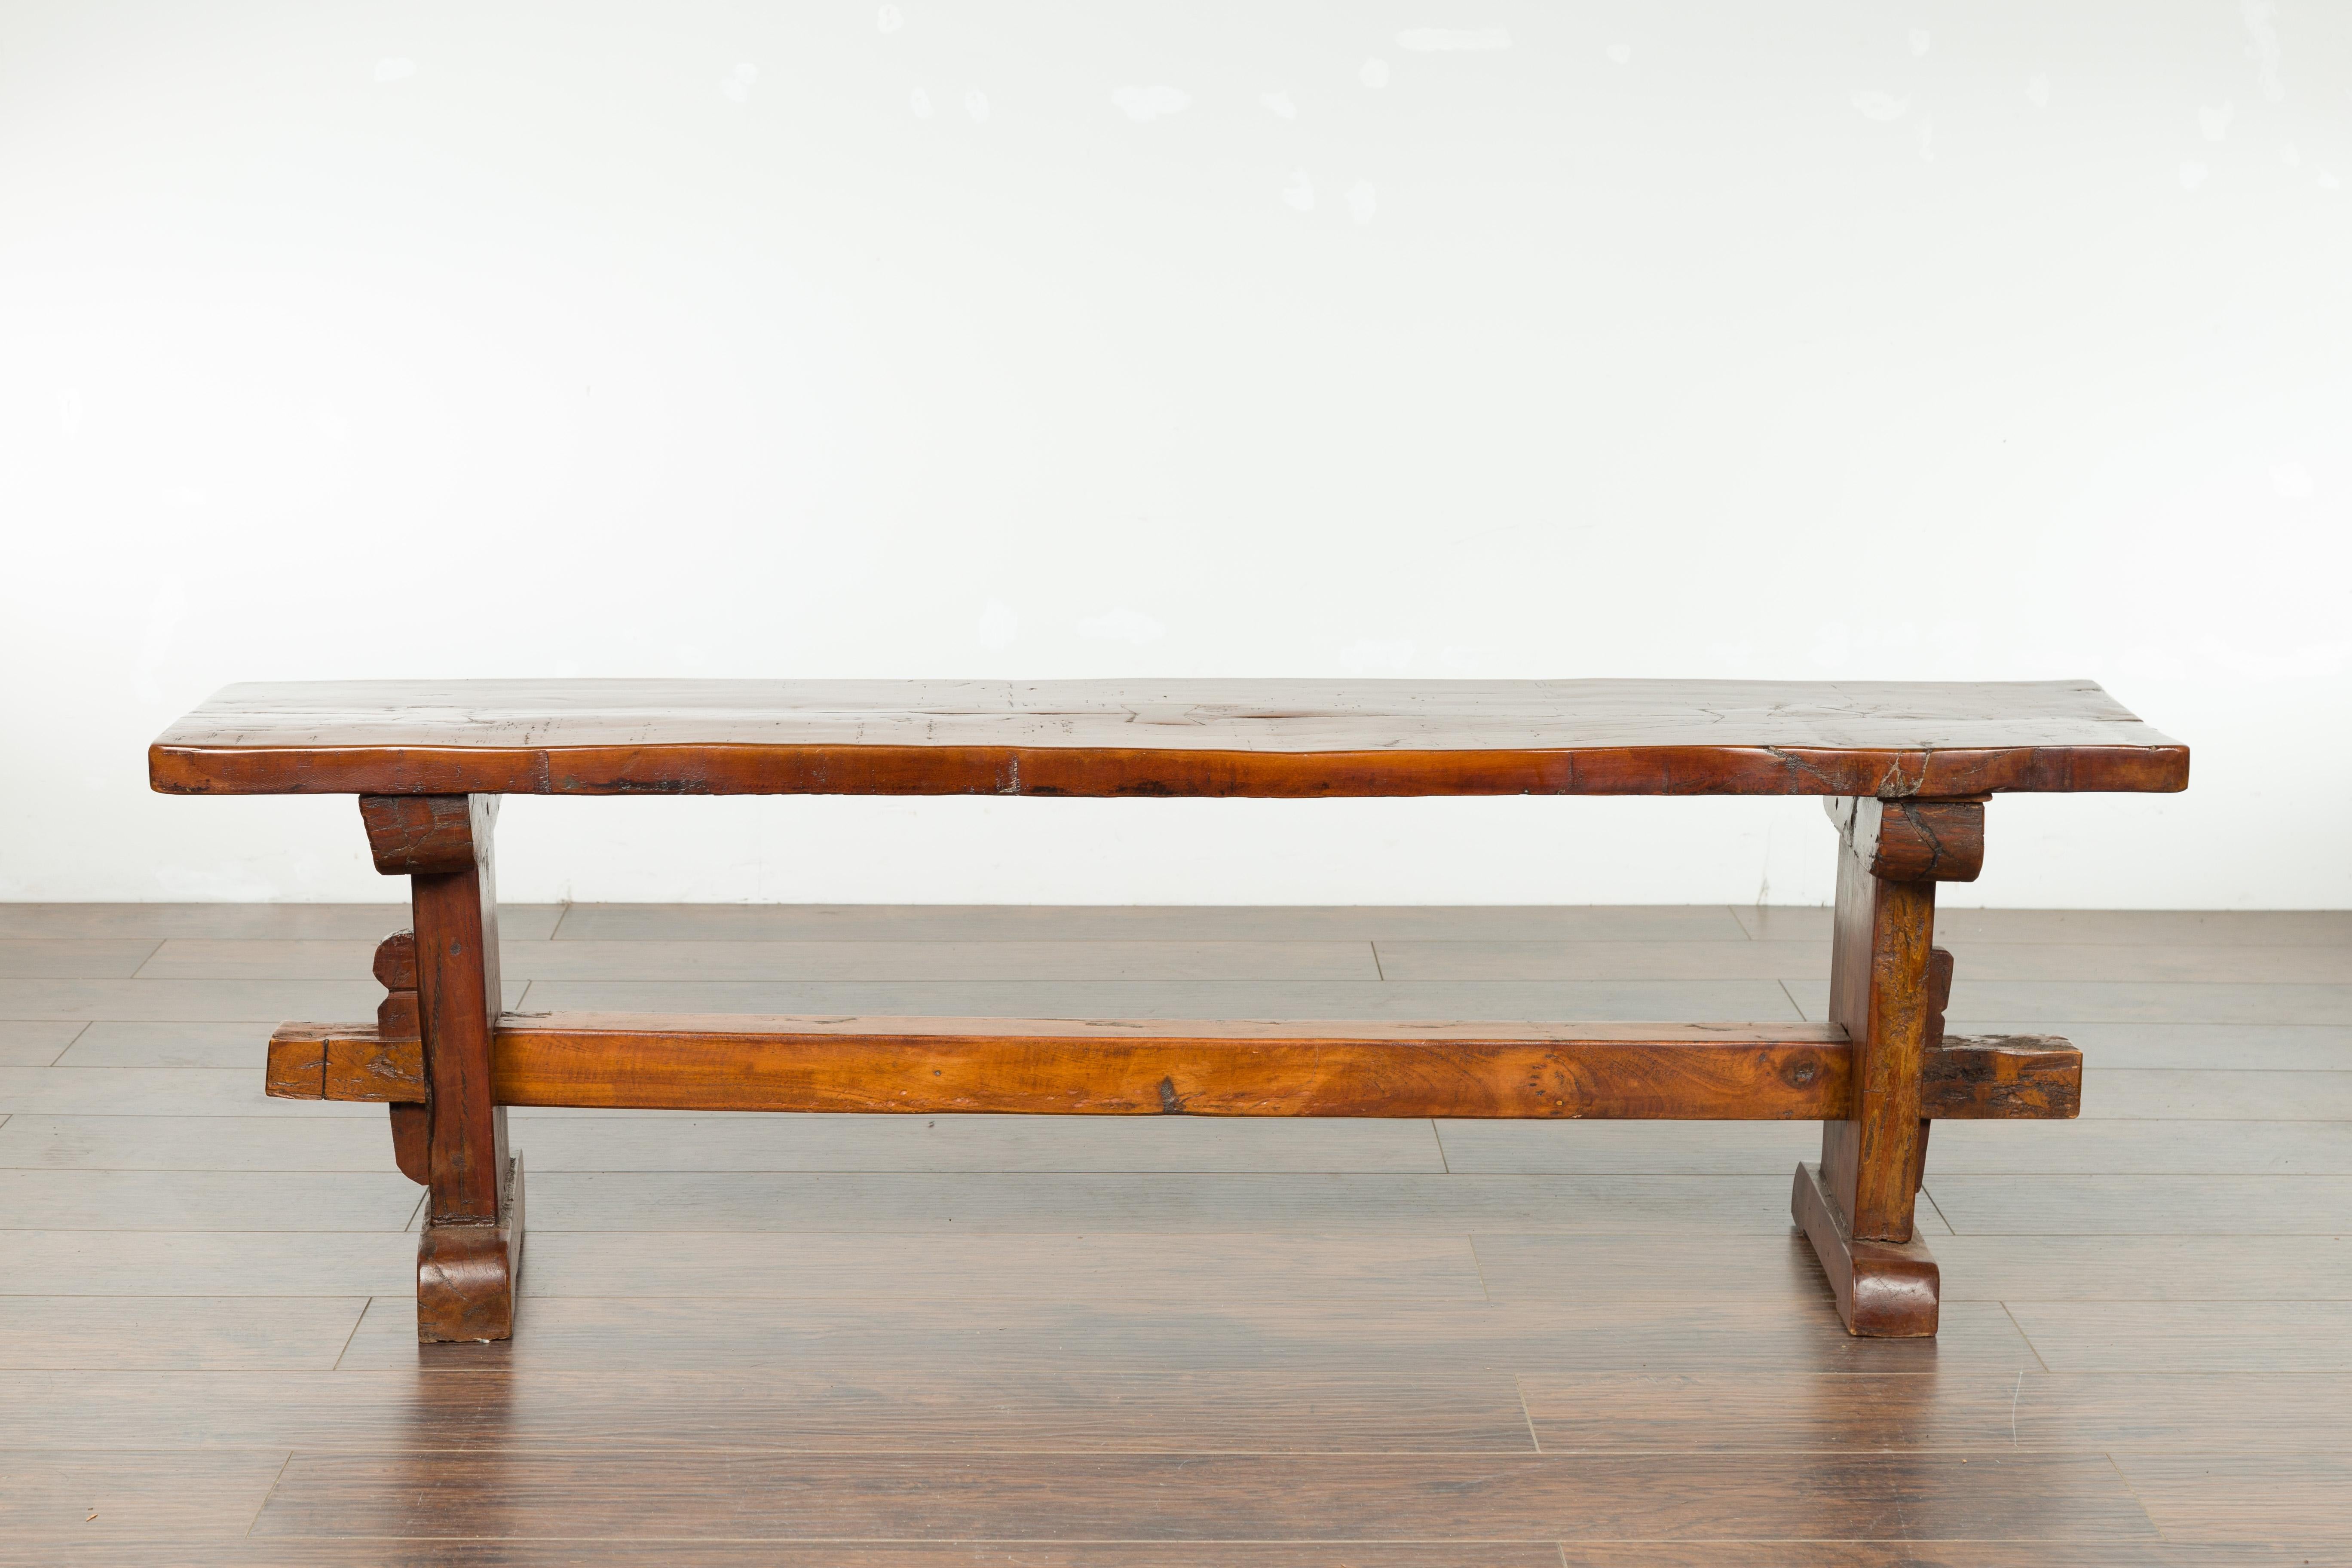 Rustic Italian Walnut Bench with Trestle Base from the Early 19th Century 12